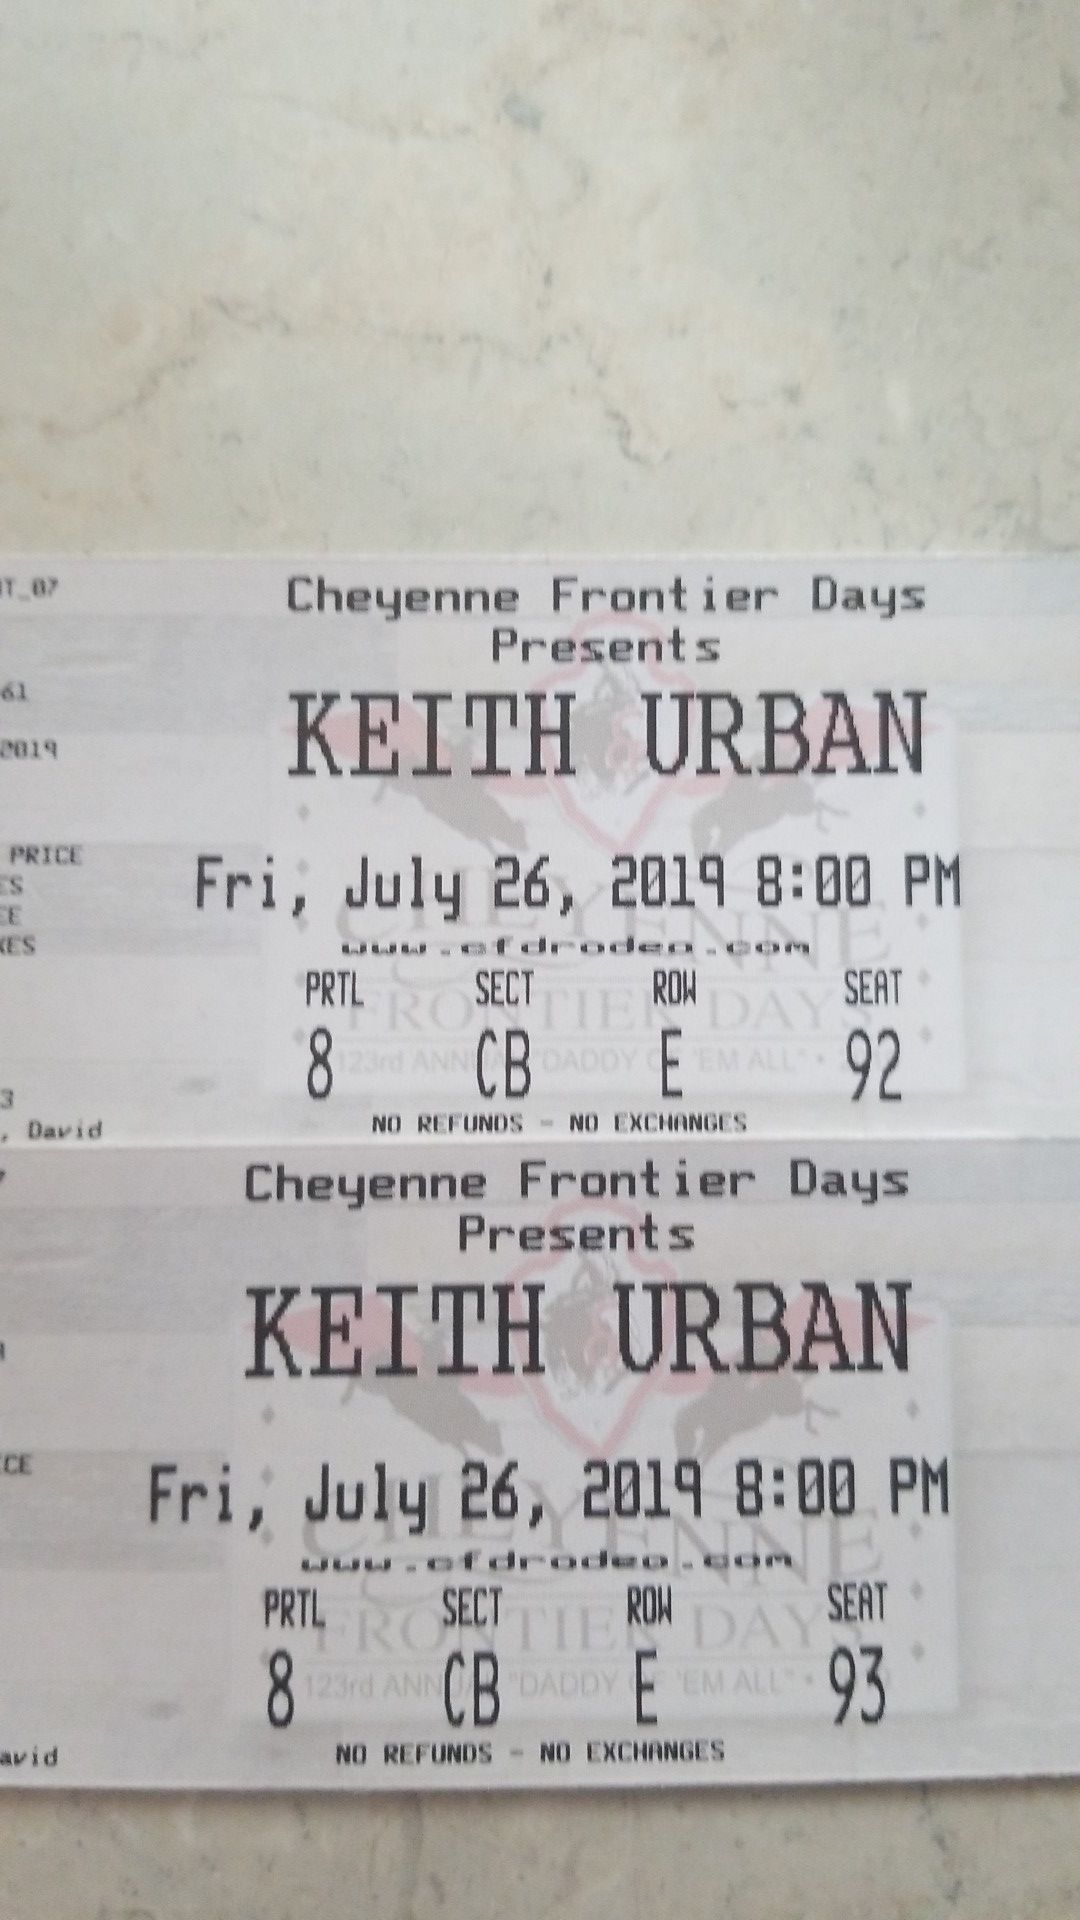 Keith urban tickets for tonight's concert